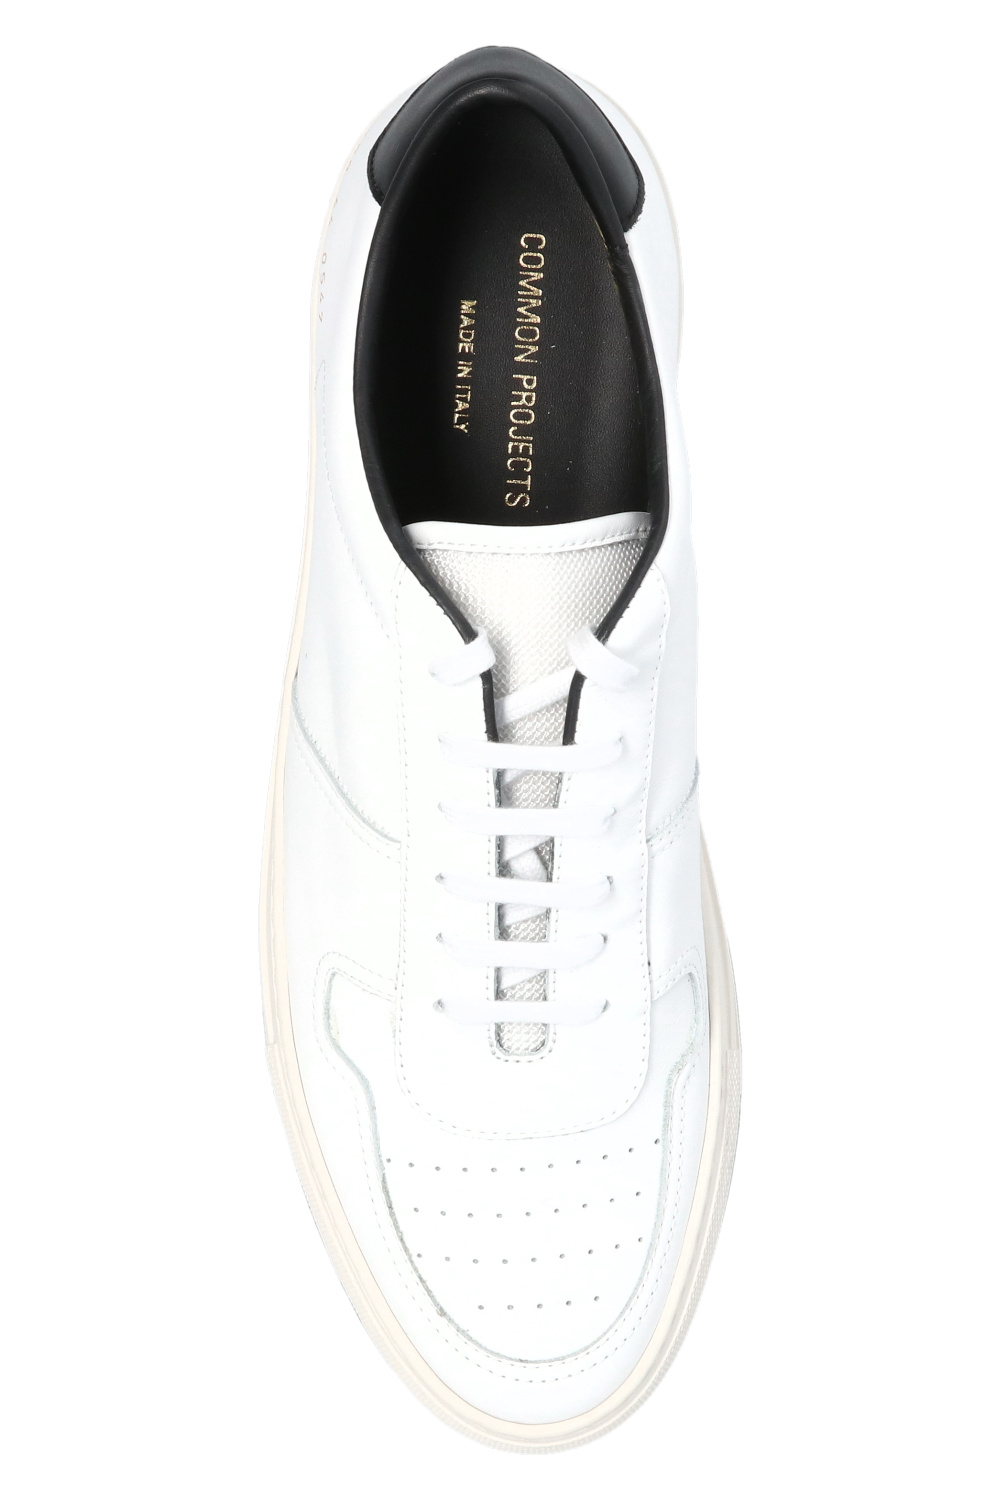 Common Projects ‘Bball ‘90’ sneakers | Men's Shoes | Vitkac